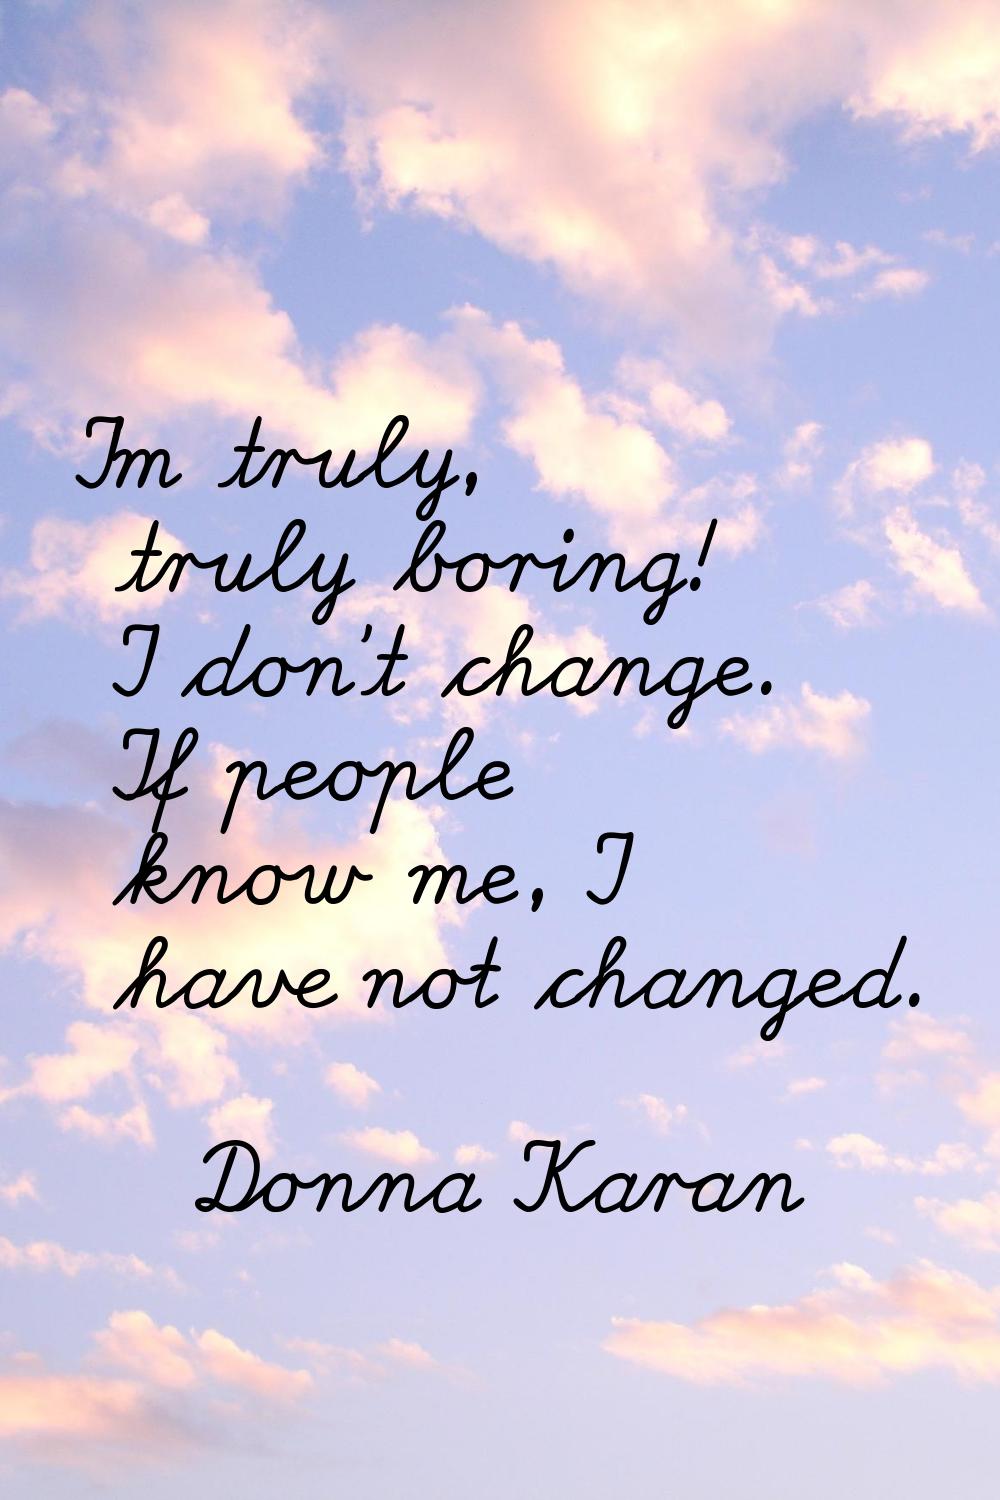 I'm truly, truly boring! I don't change. If people know me, I have not changed.